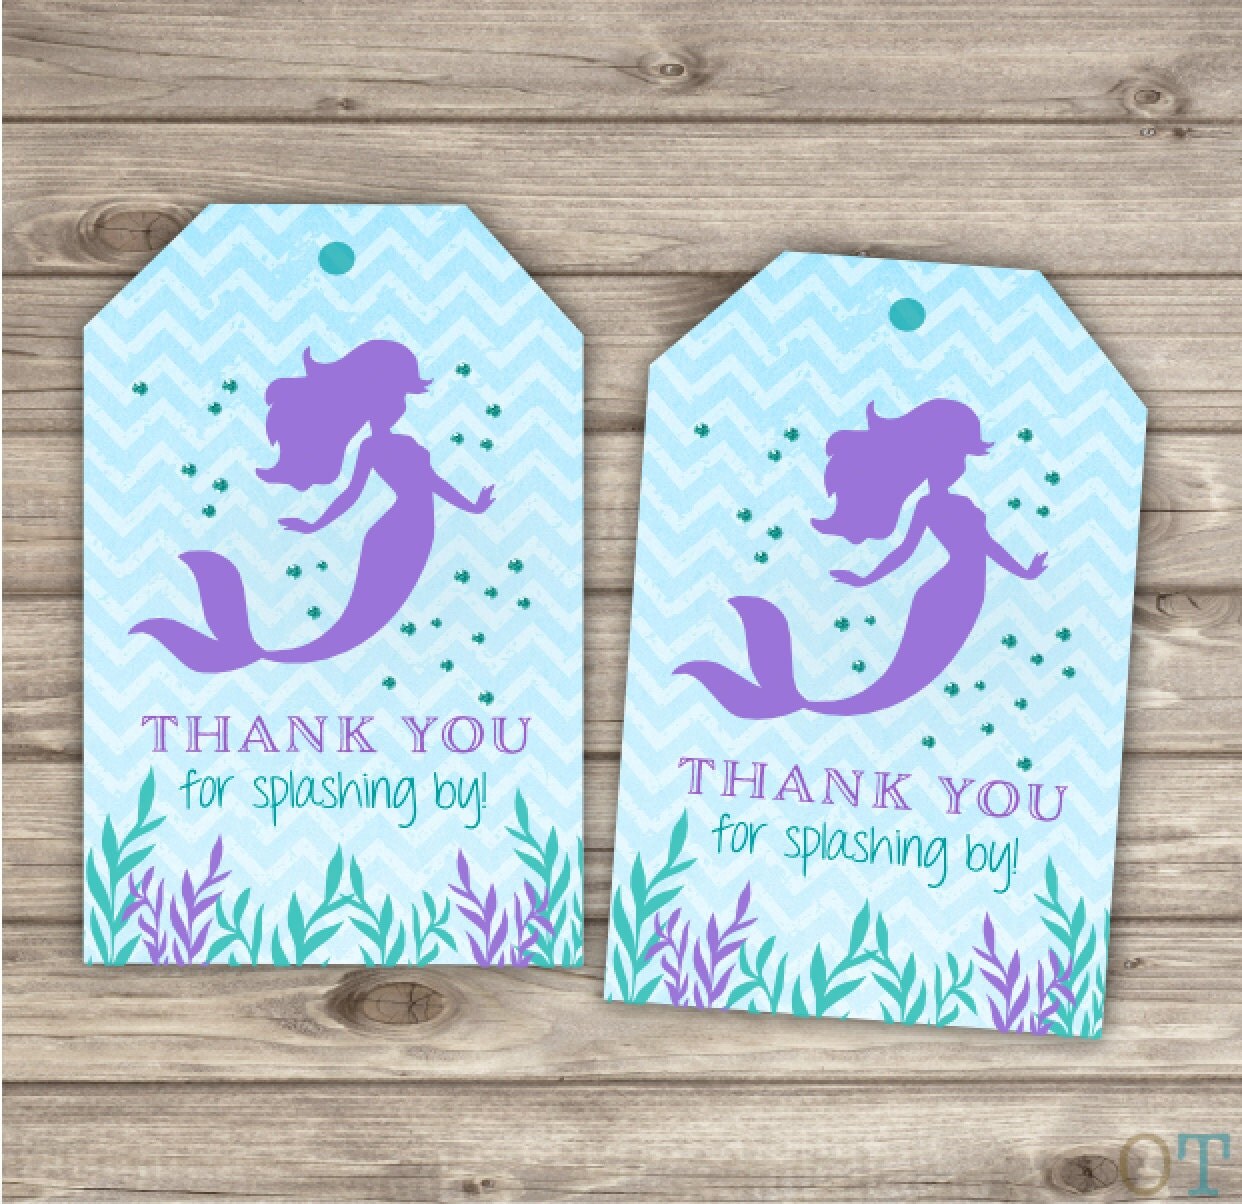 mermaid-thank-you-tags-purple-and-teal-with-blue-chevron